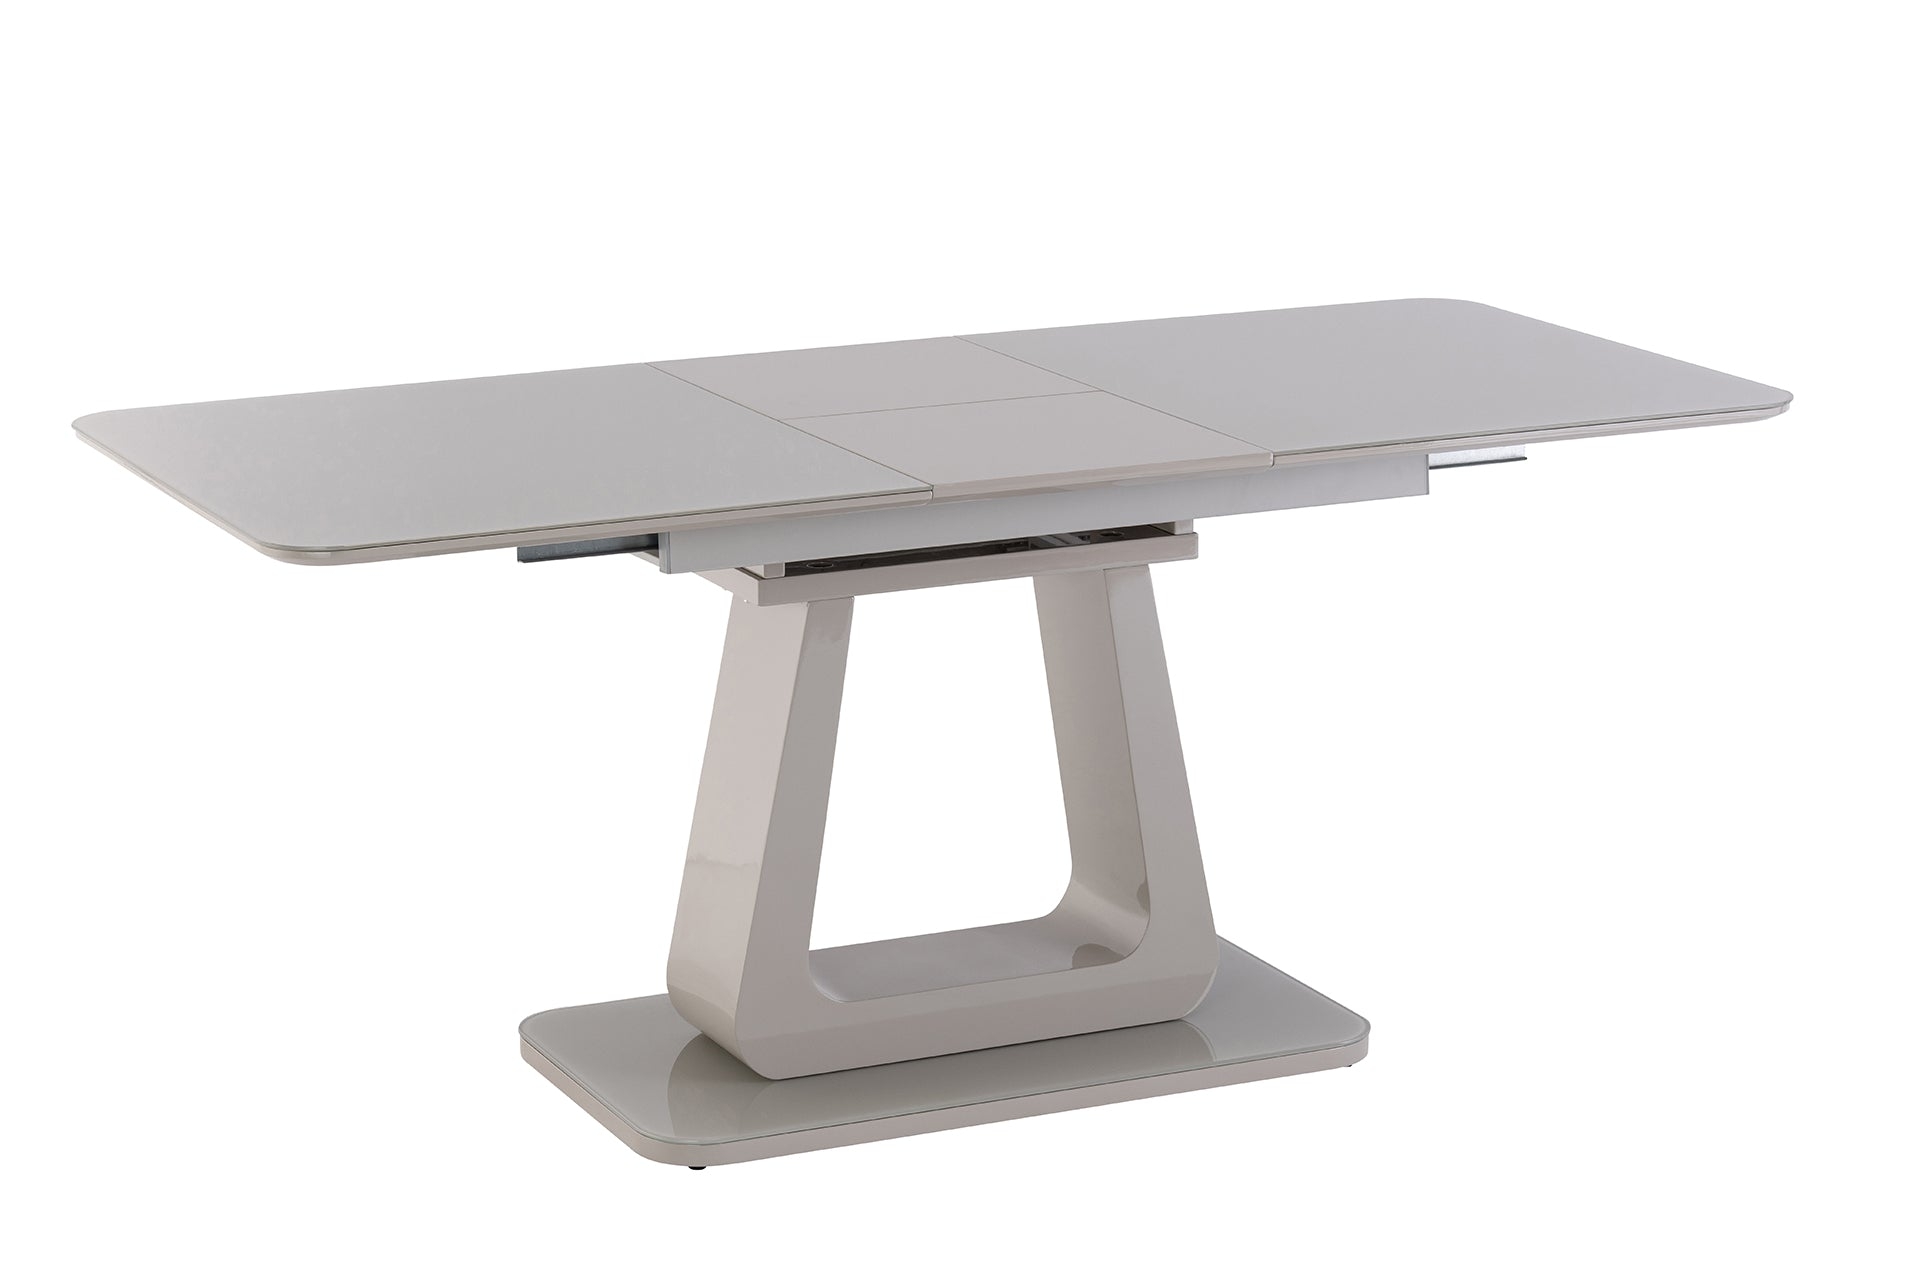 Cali White Gloss/ Glass Inset 1.4m – 1.8m Oak Extension Dining Table, Grey – Lc Living